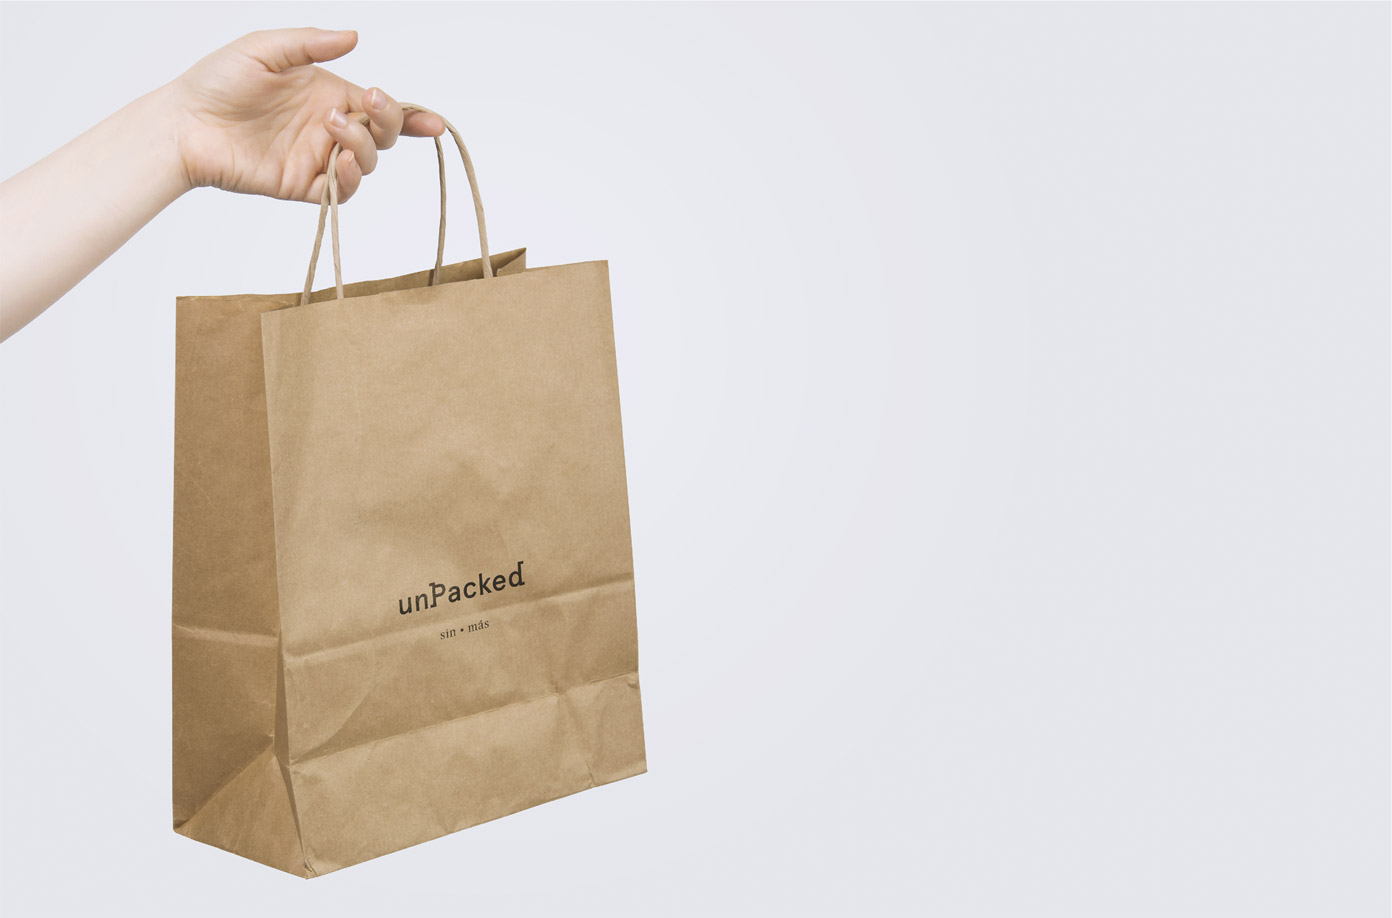 Branding, graphic design, and packaging by fagerström for unPacked.